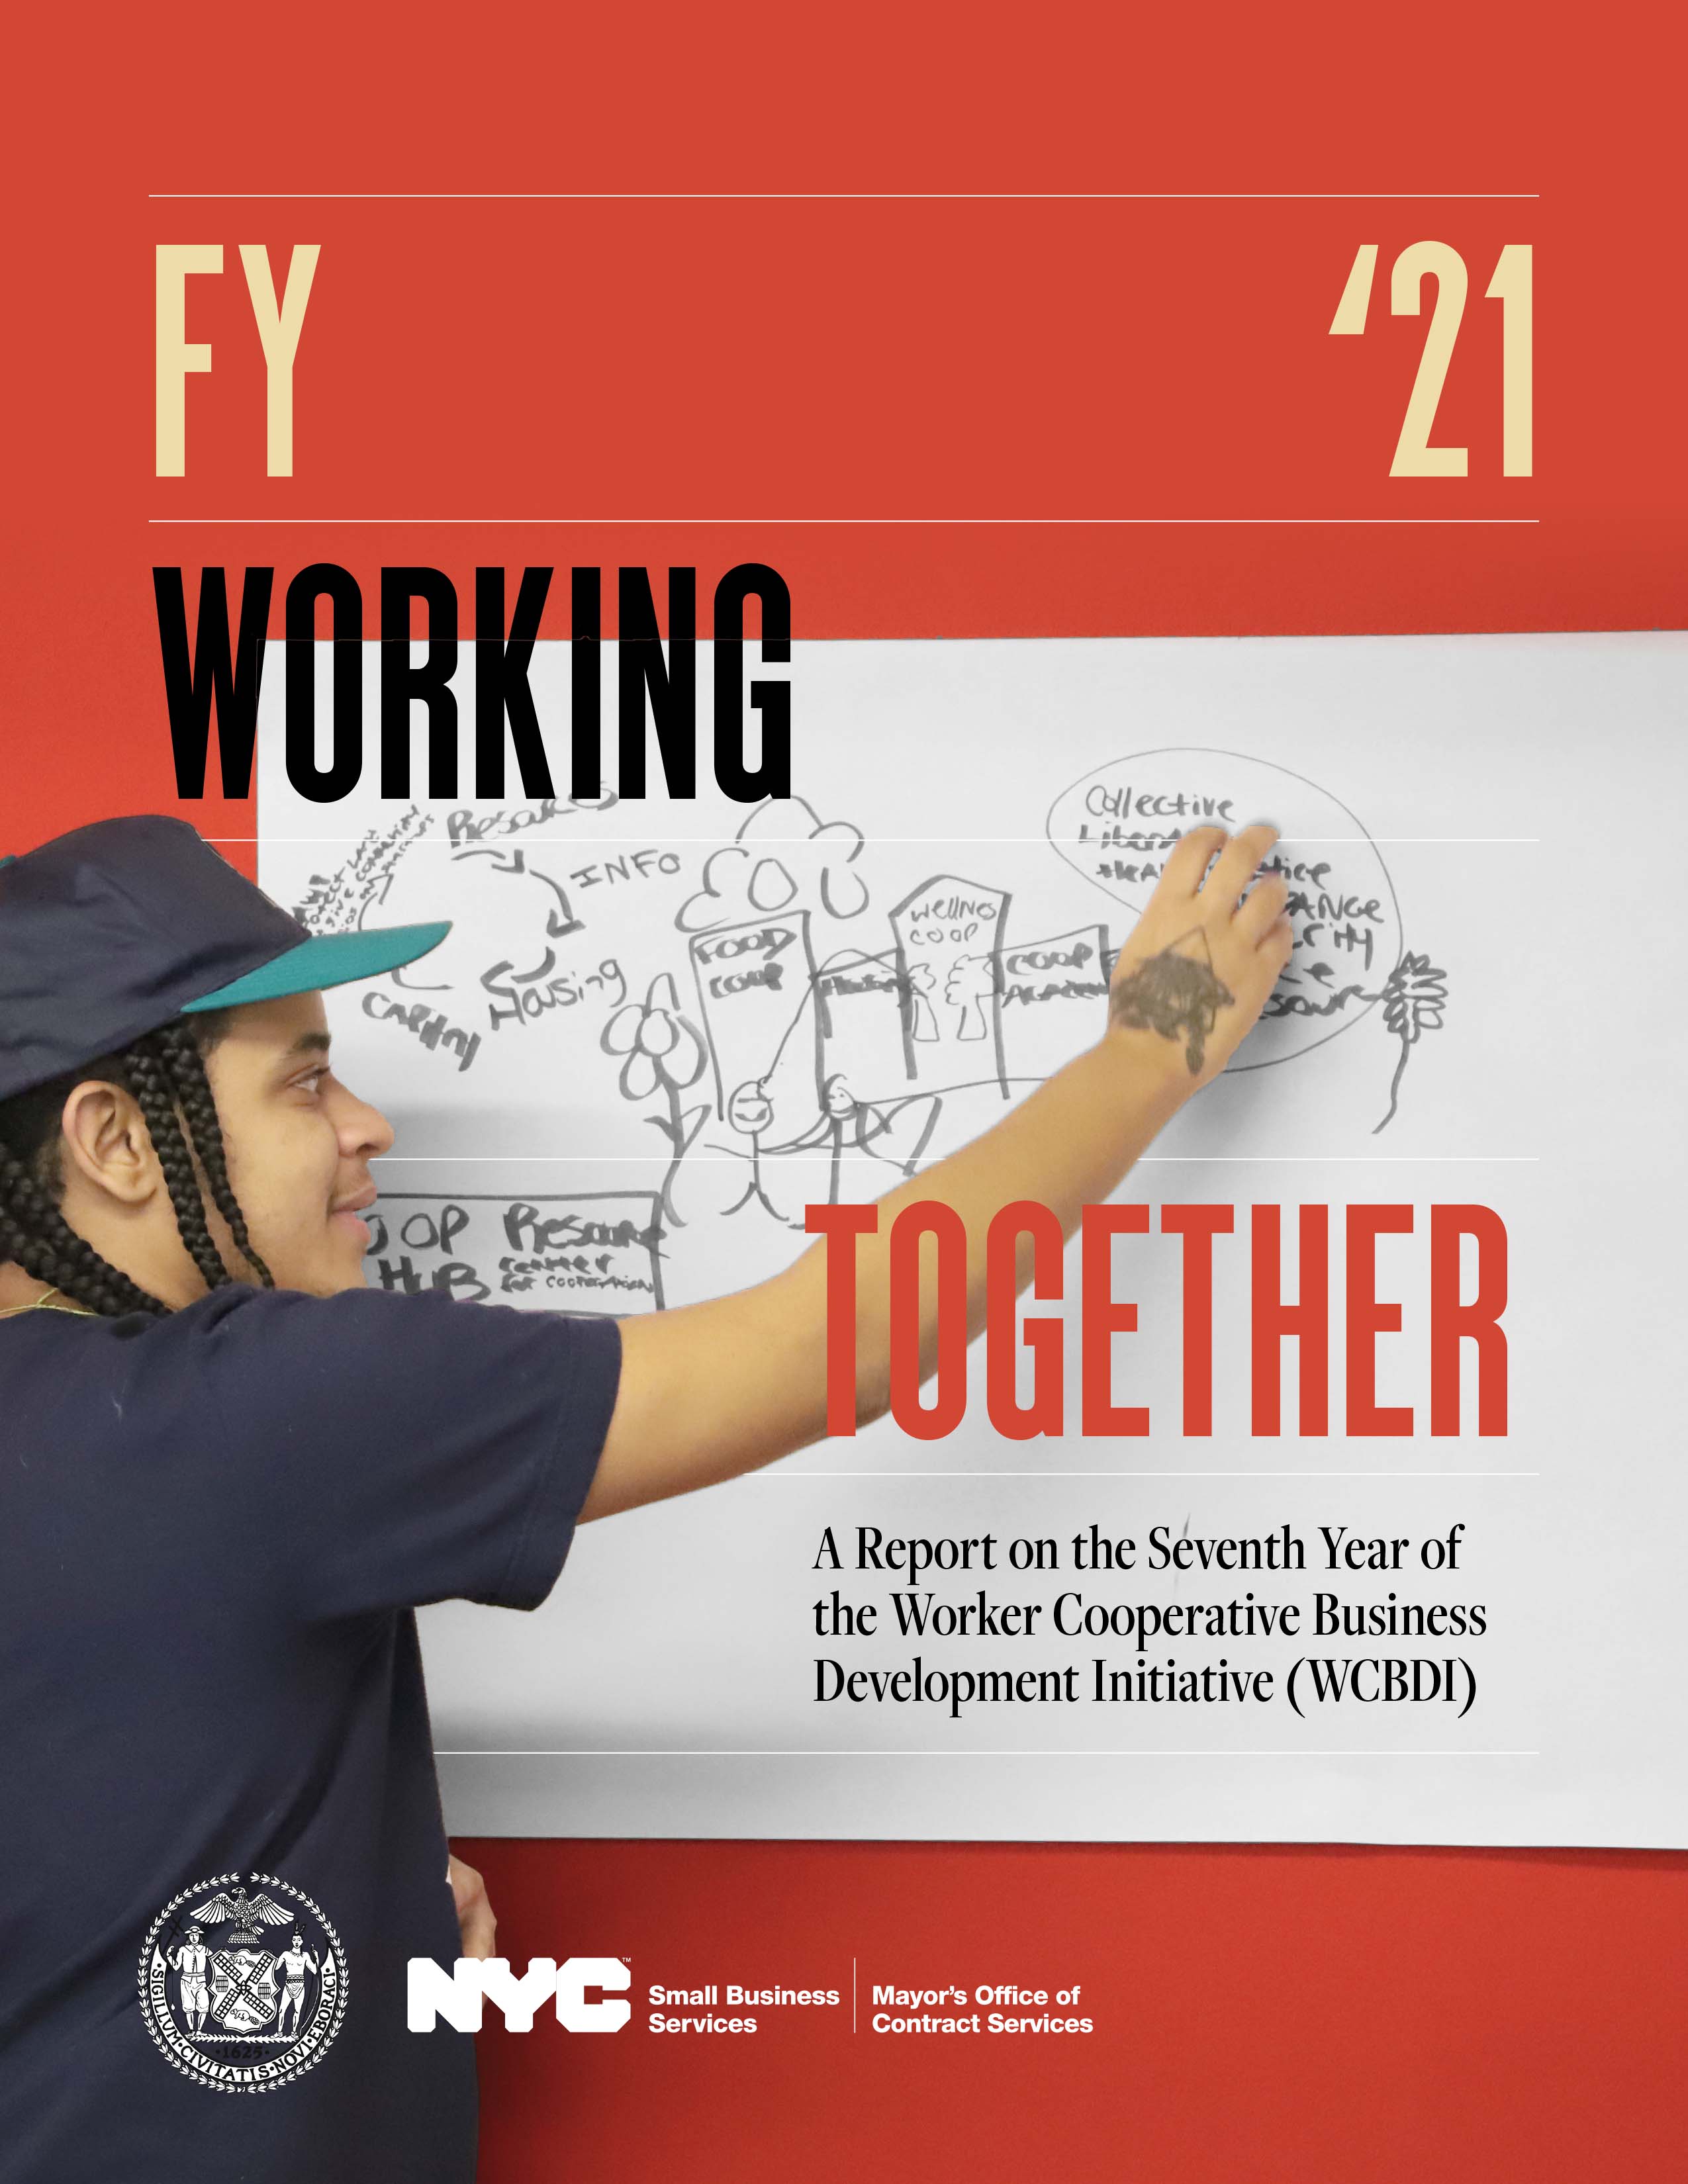 Working Together: A Report on the Seventh Year of the Worker Cooperative Business Development Initiative